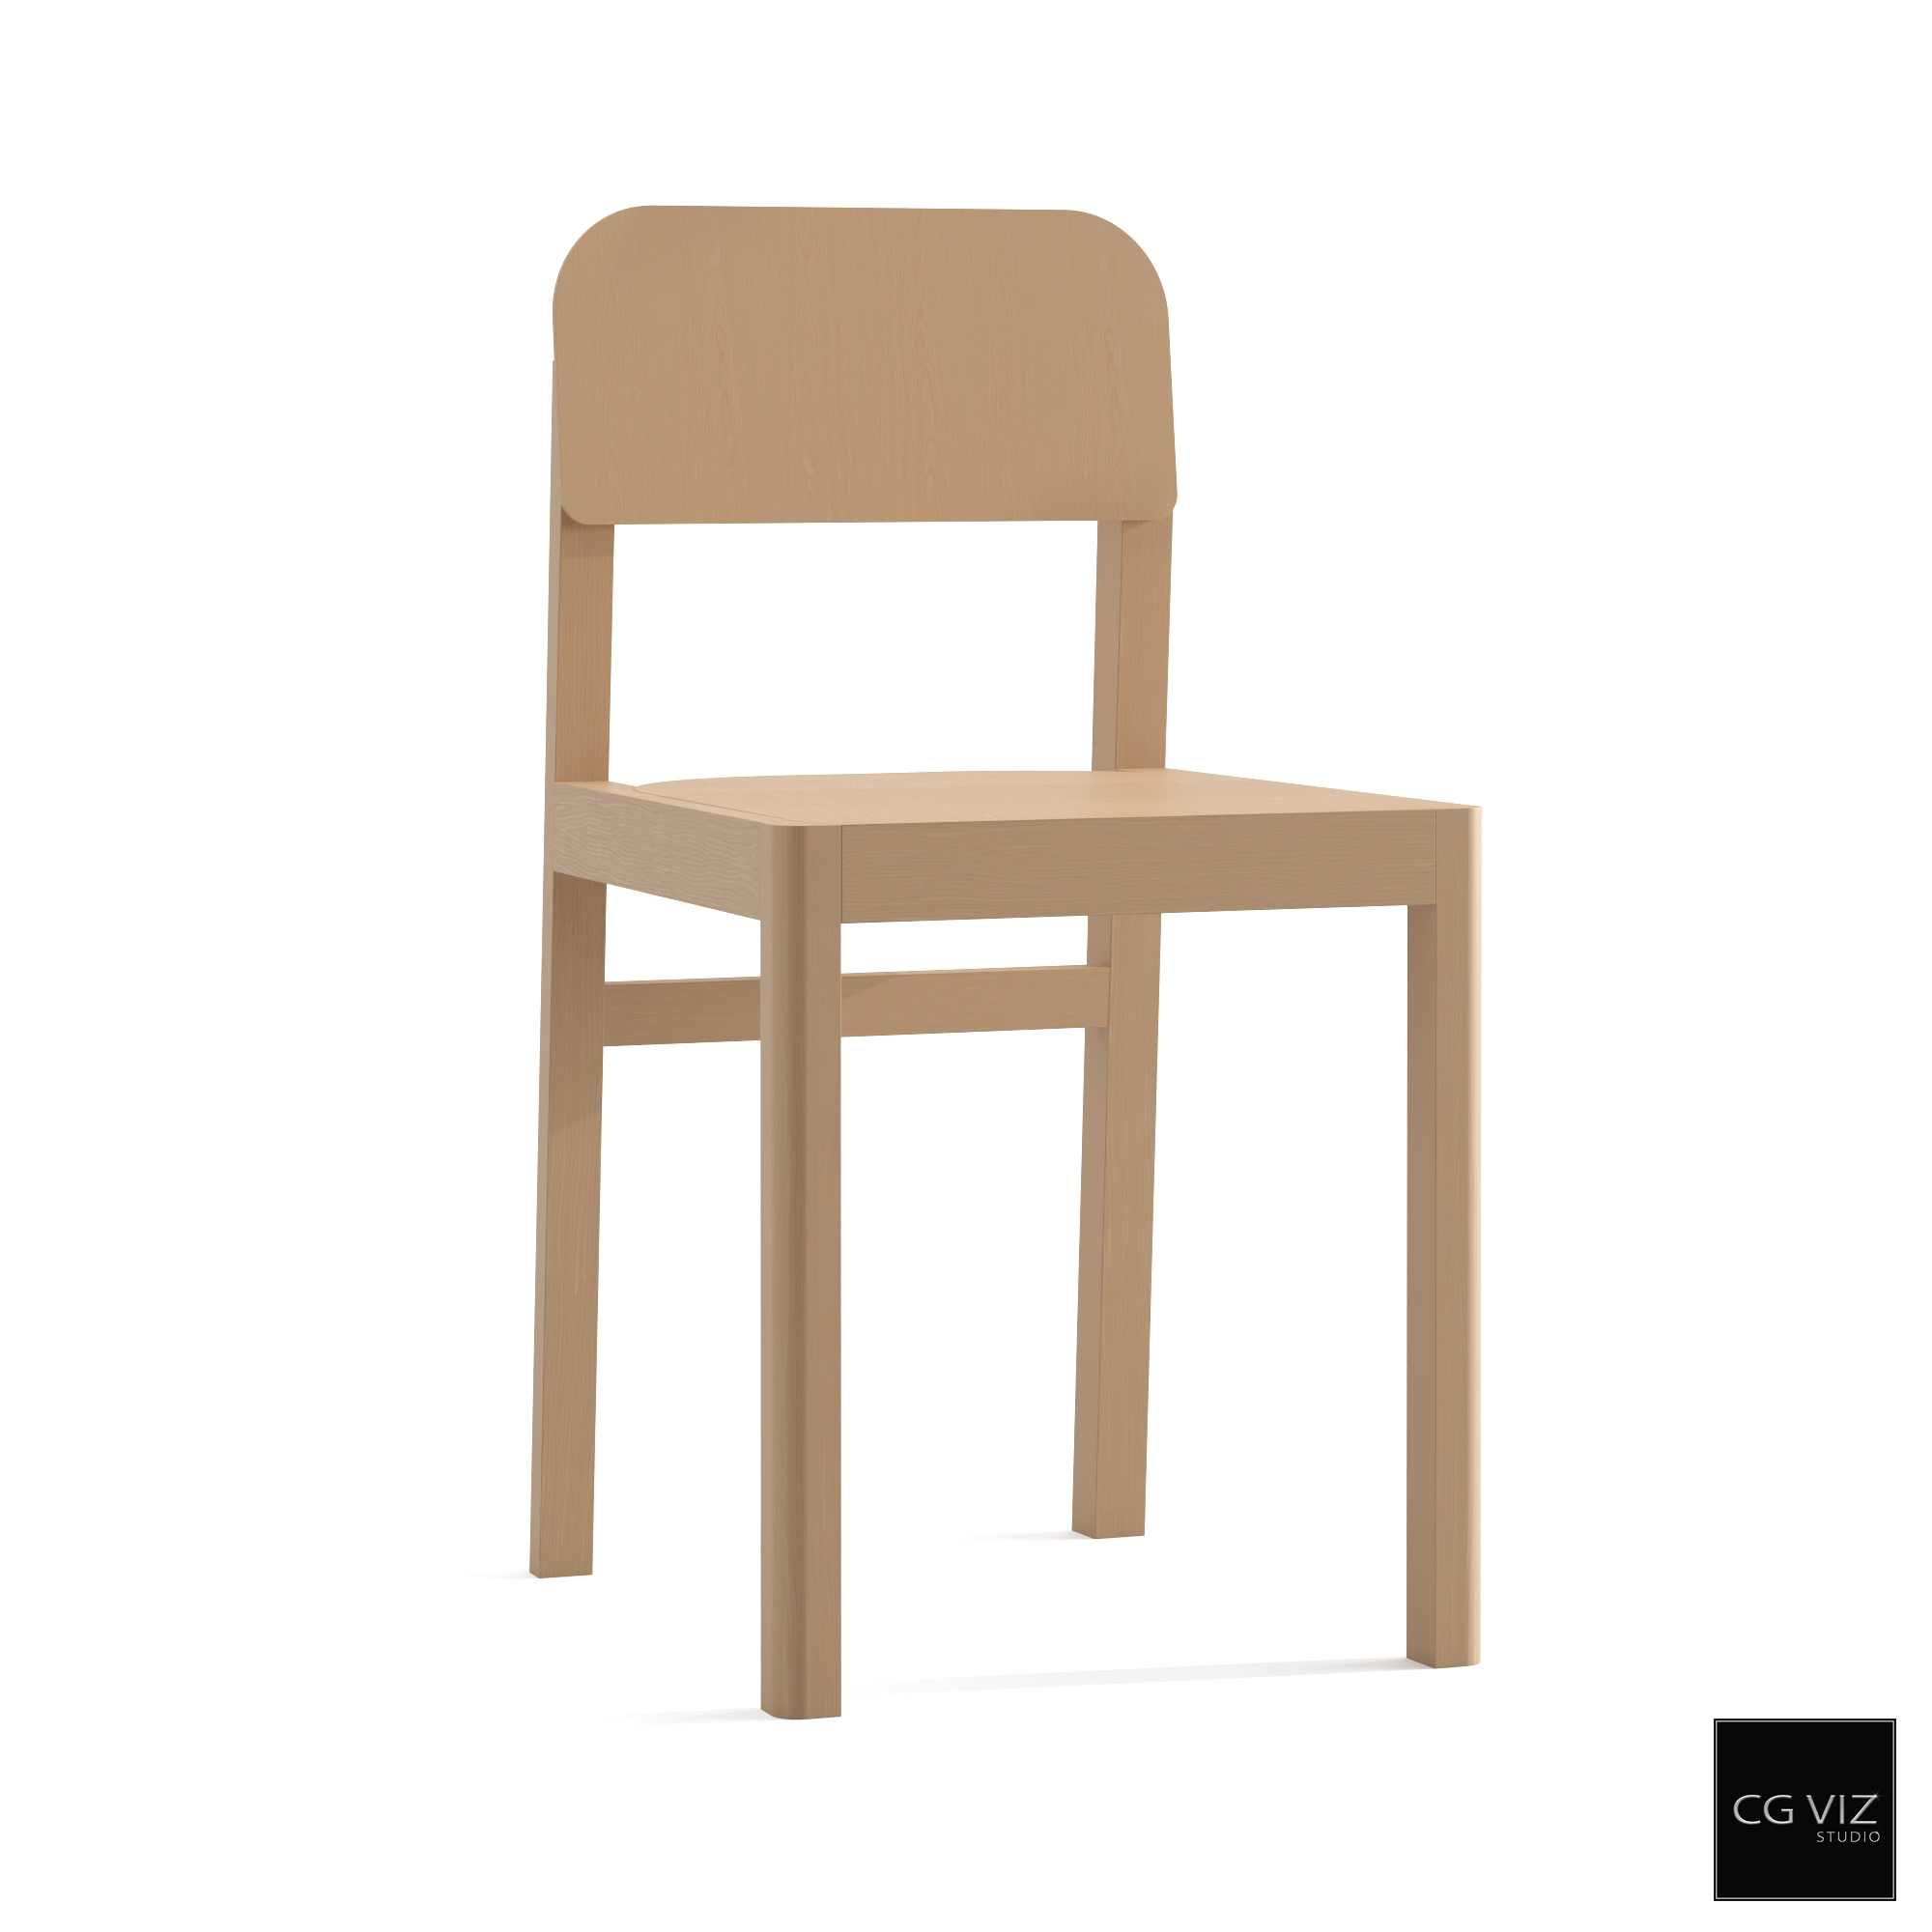 Rendered Preview of Muuto Workshop Chair 3D Model